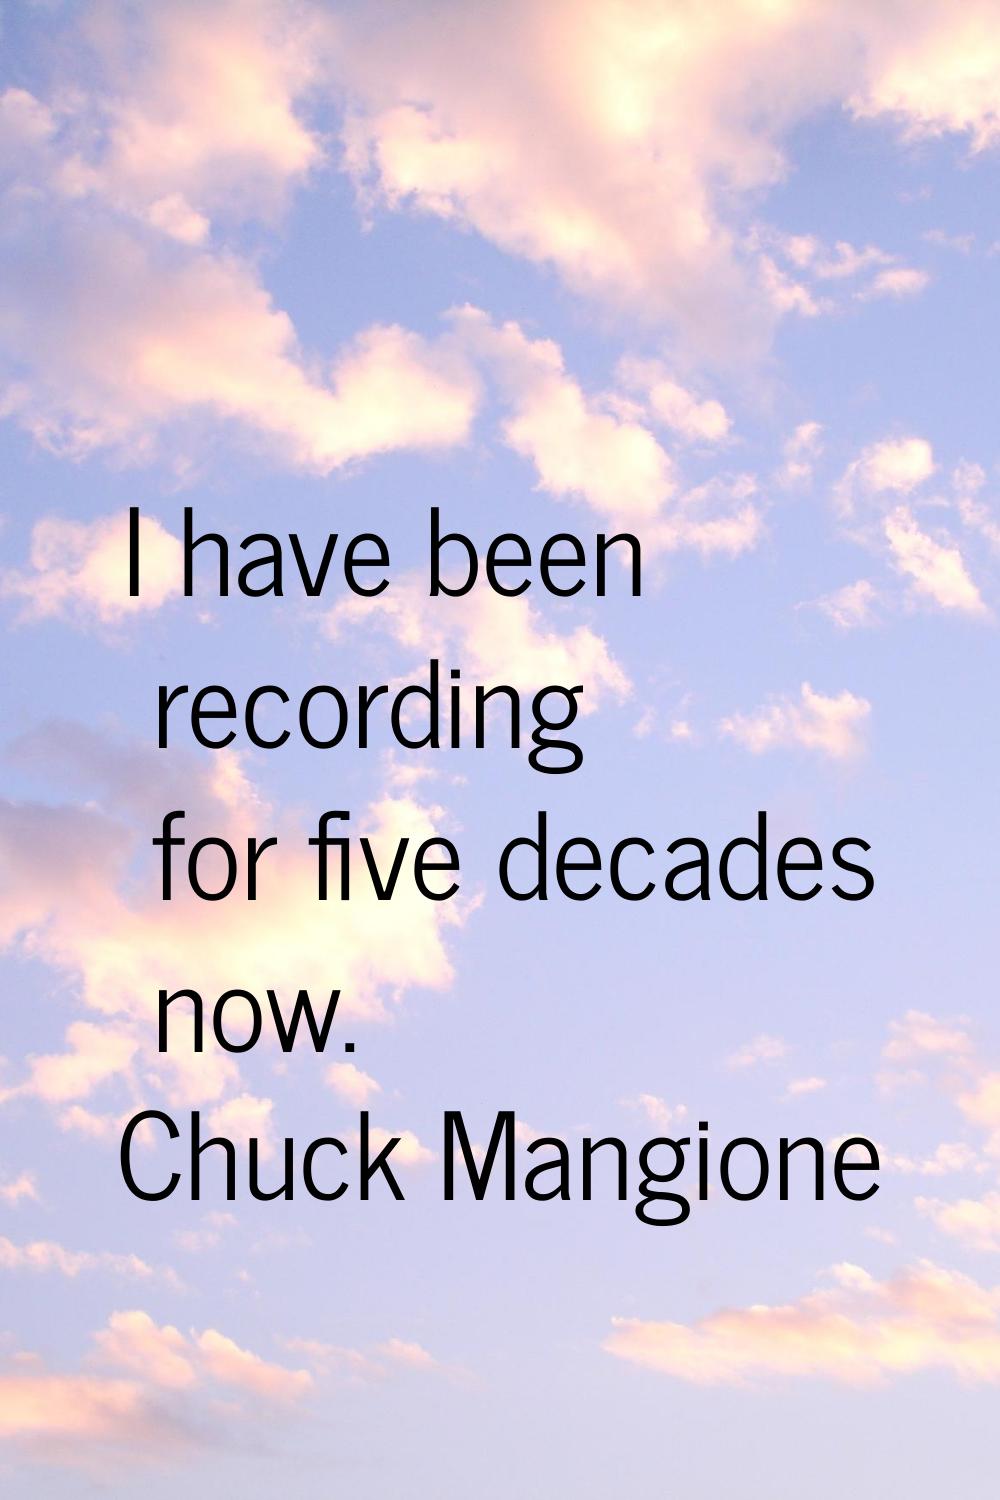 I have been recording for five decades now.